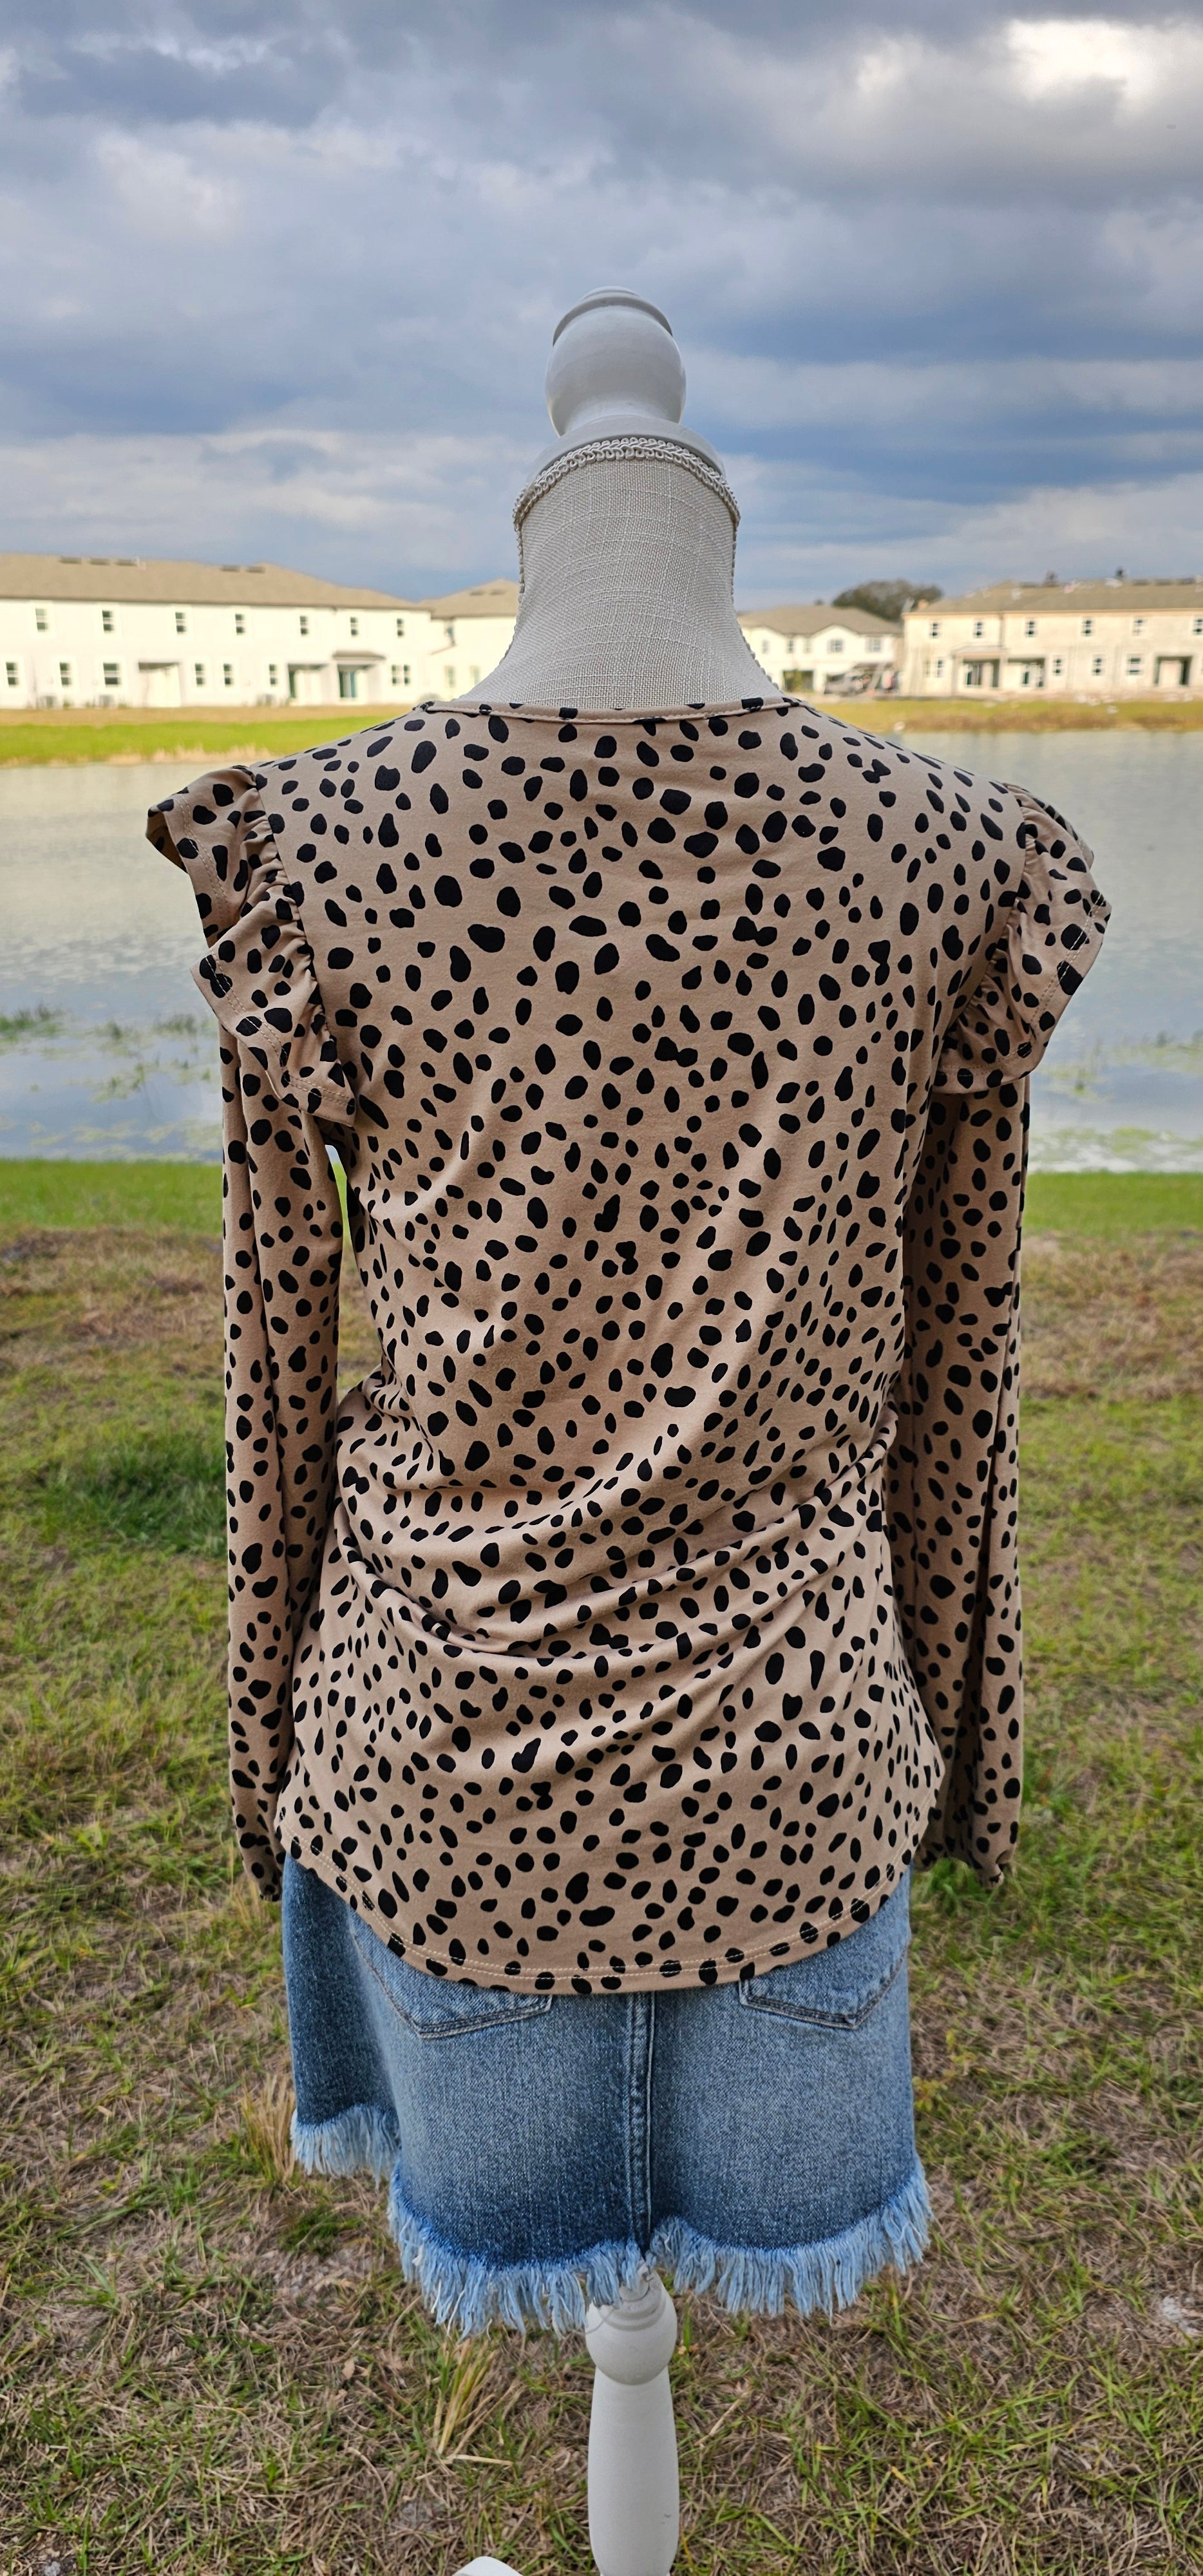 Long sleeve top with a pleaded neckline, ruffles on chest and shoulders, elastic sleeves. Sizes small through x-large.